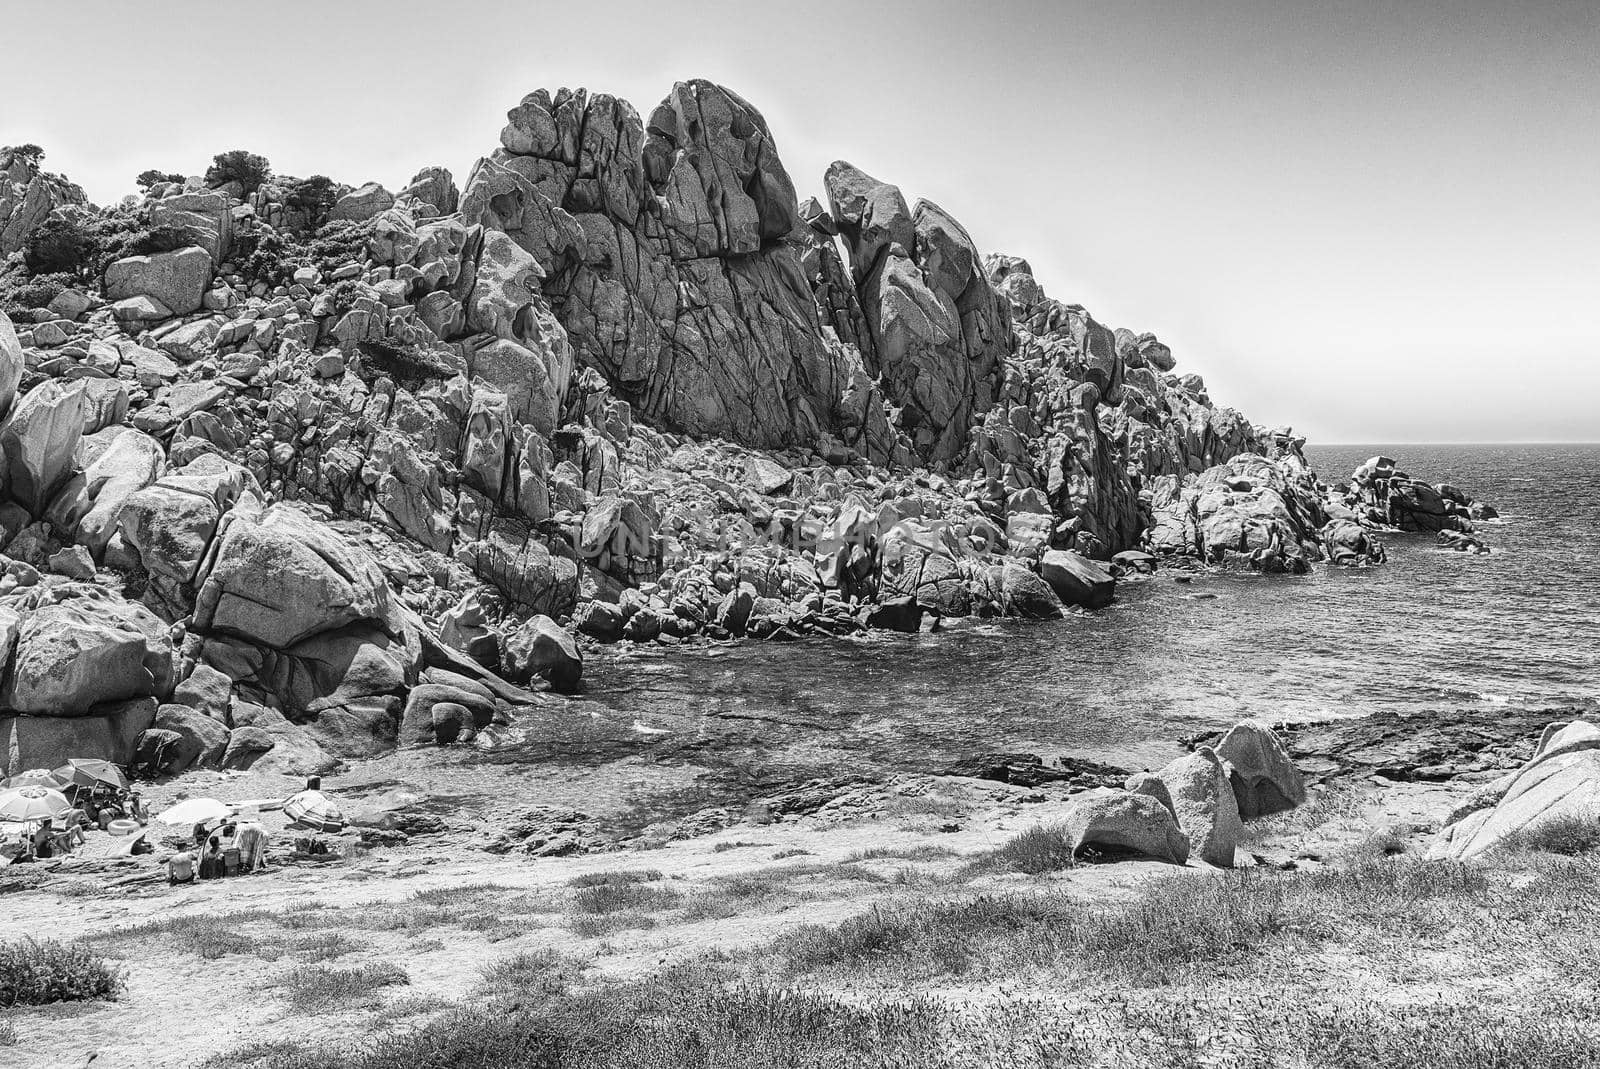 The rocky beach called Moon Valley in northern Sardinia, Italy by marcorubino